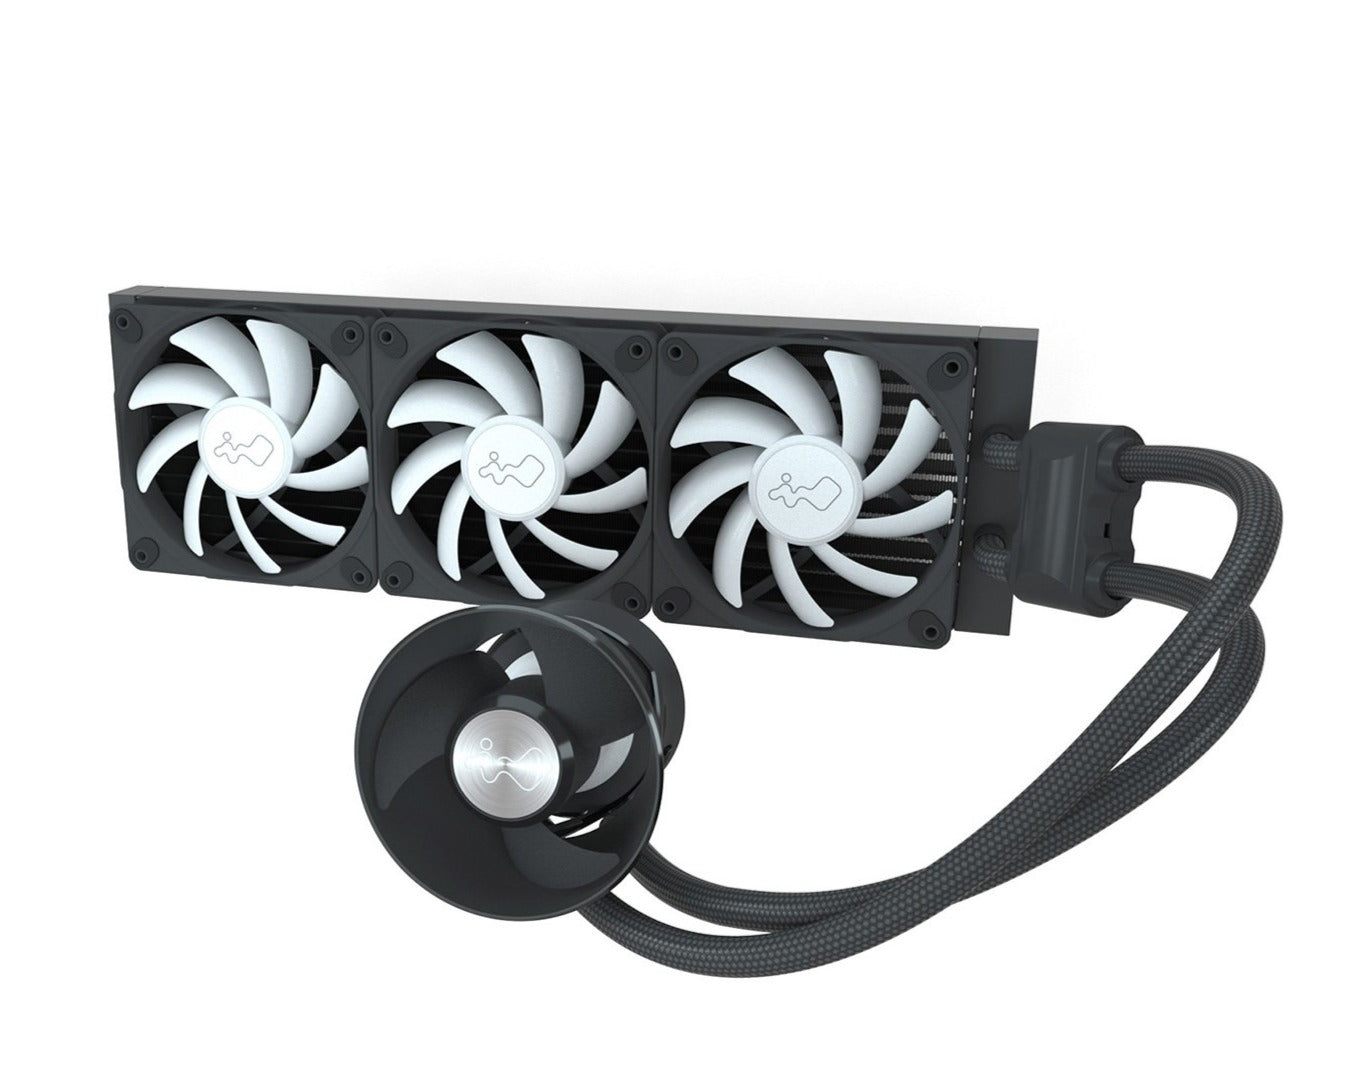 BR36 (360mm AIO with InWin UMA Cooling Design)